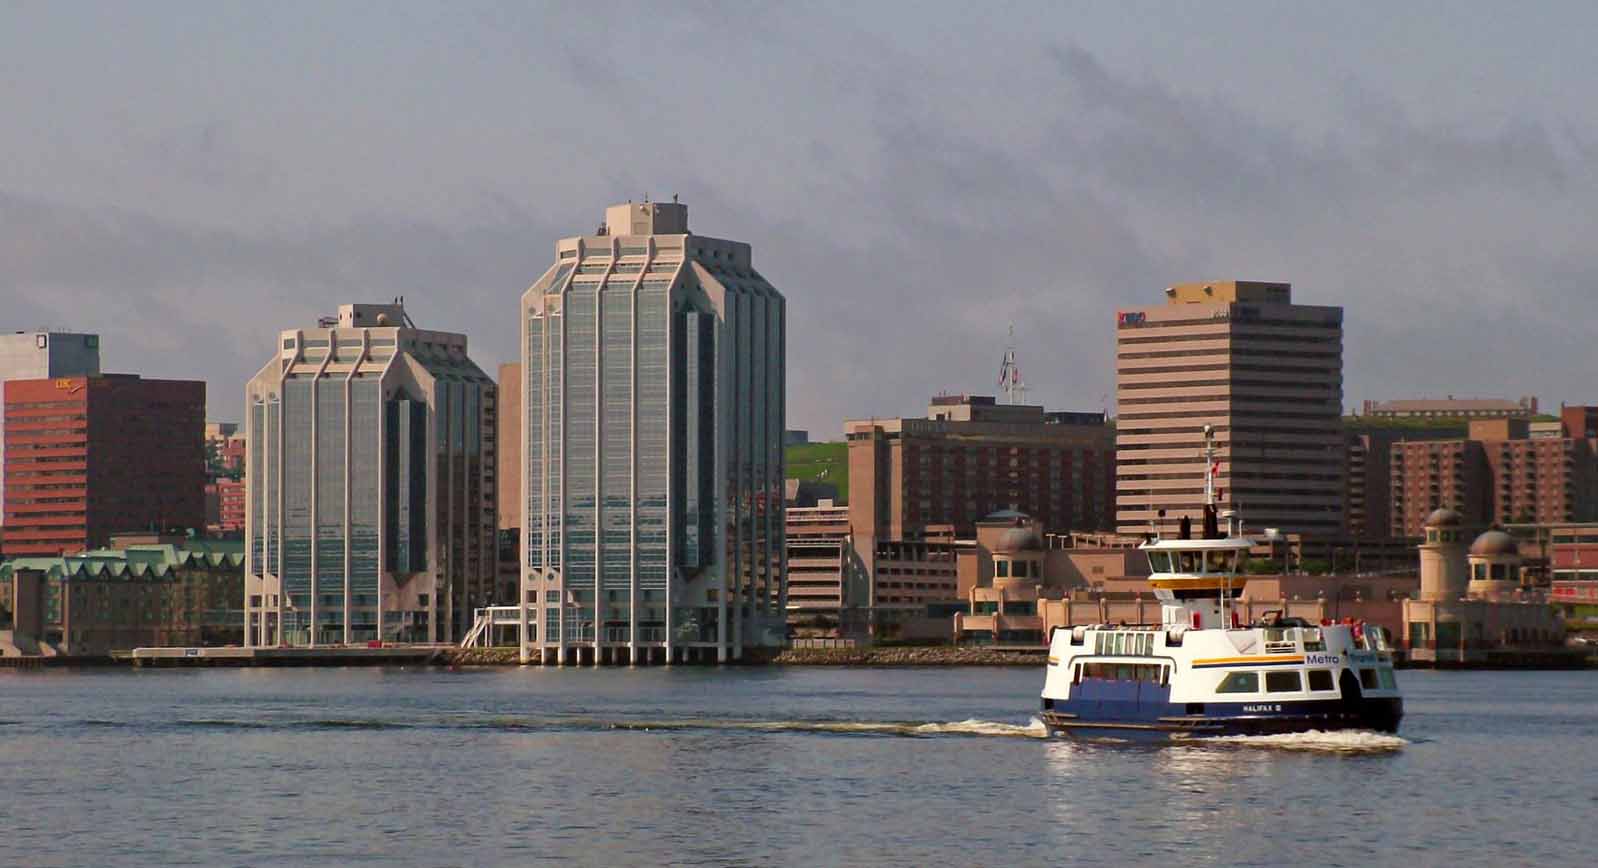 So, you’re in Halifax, now what?